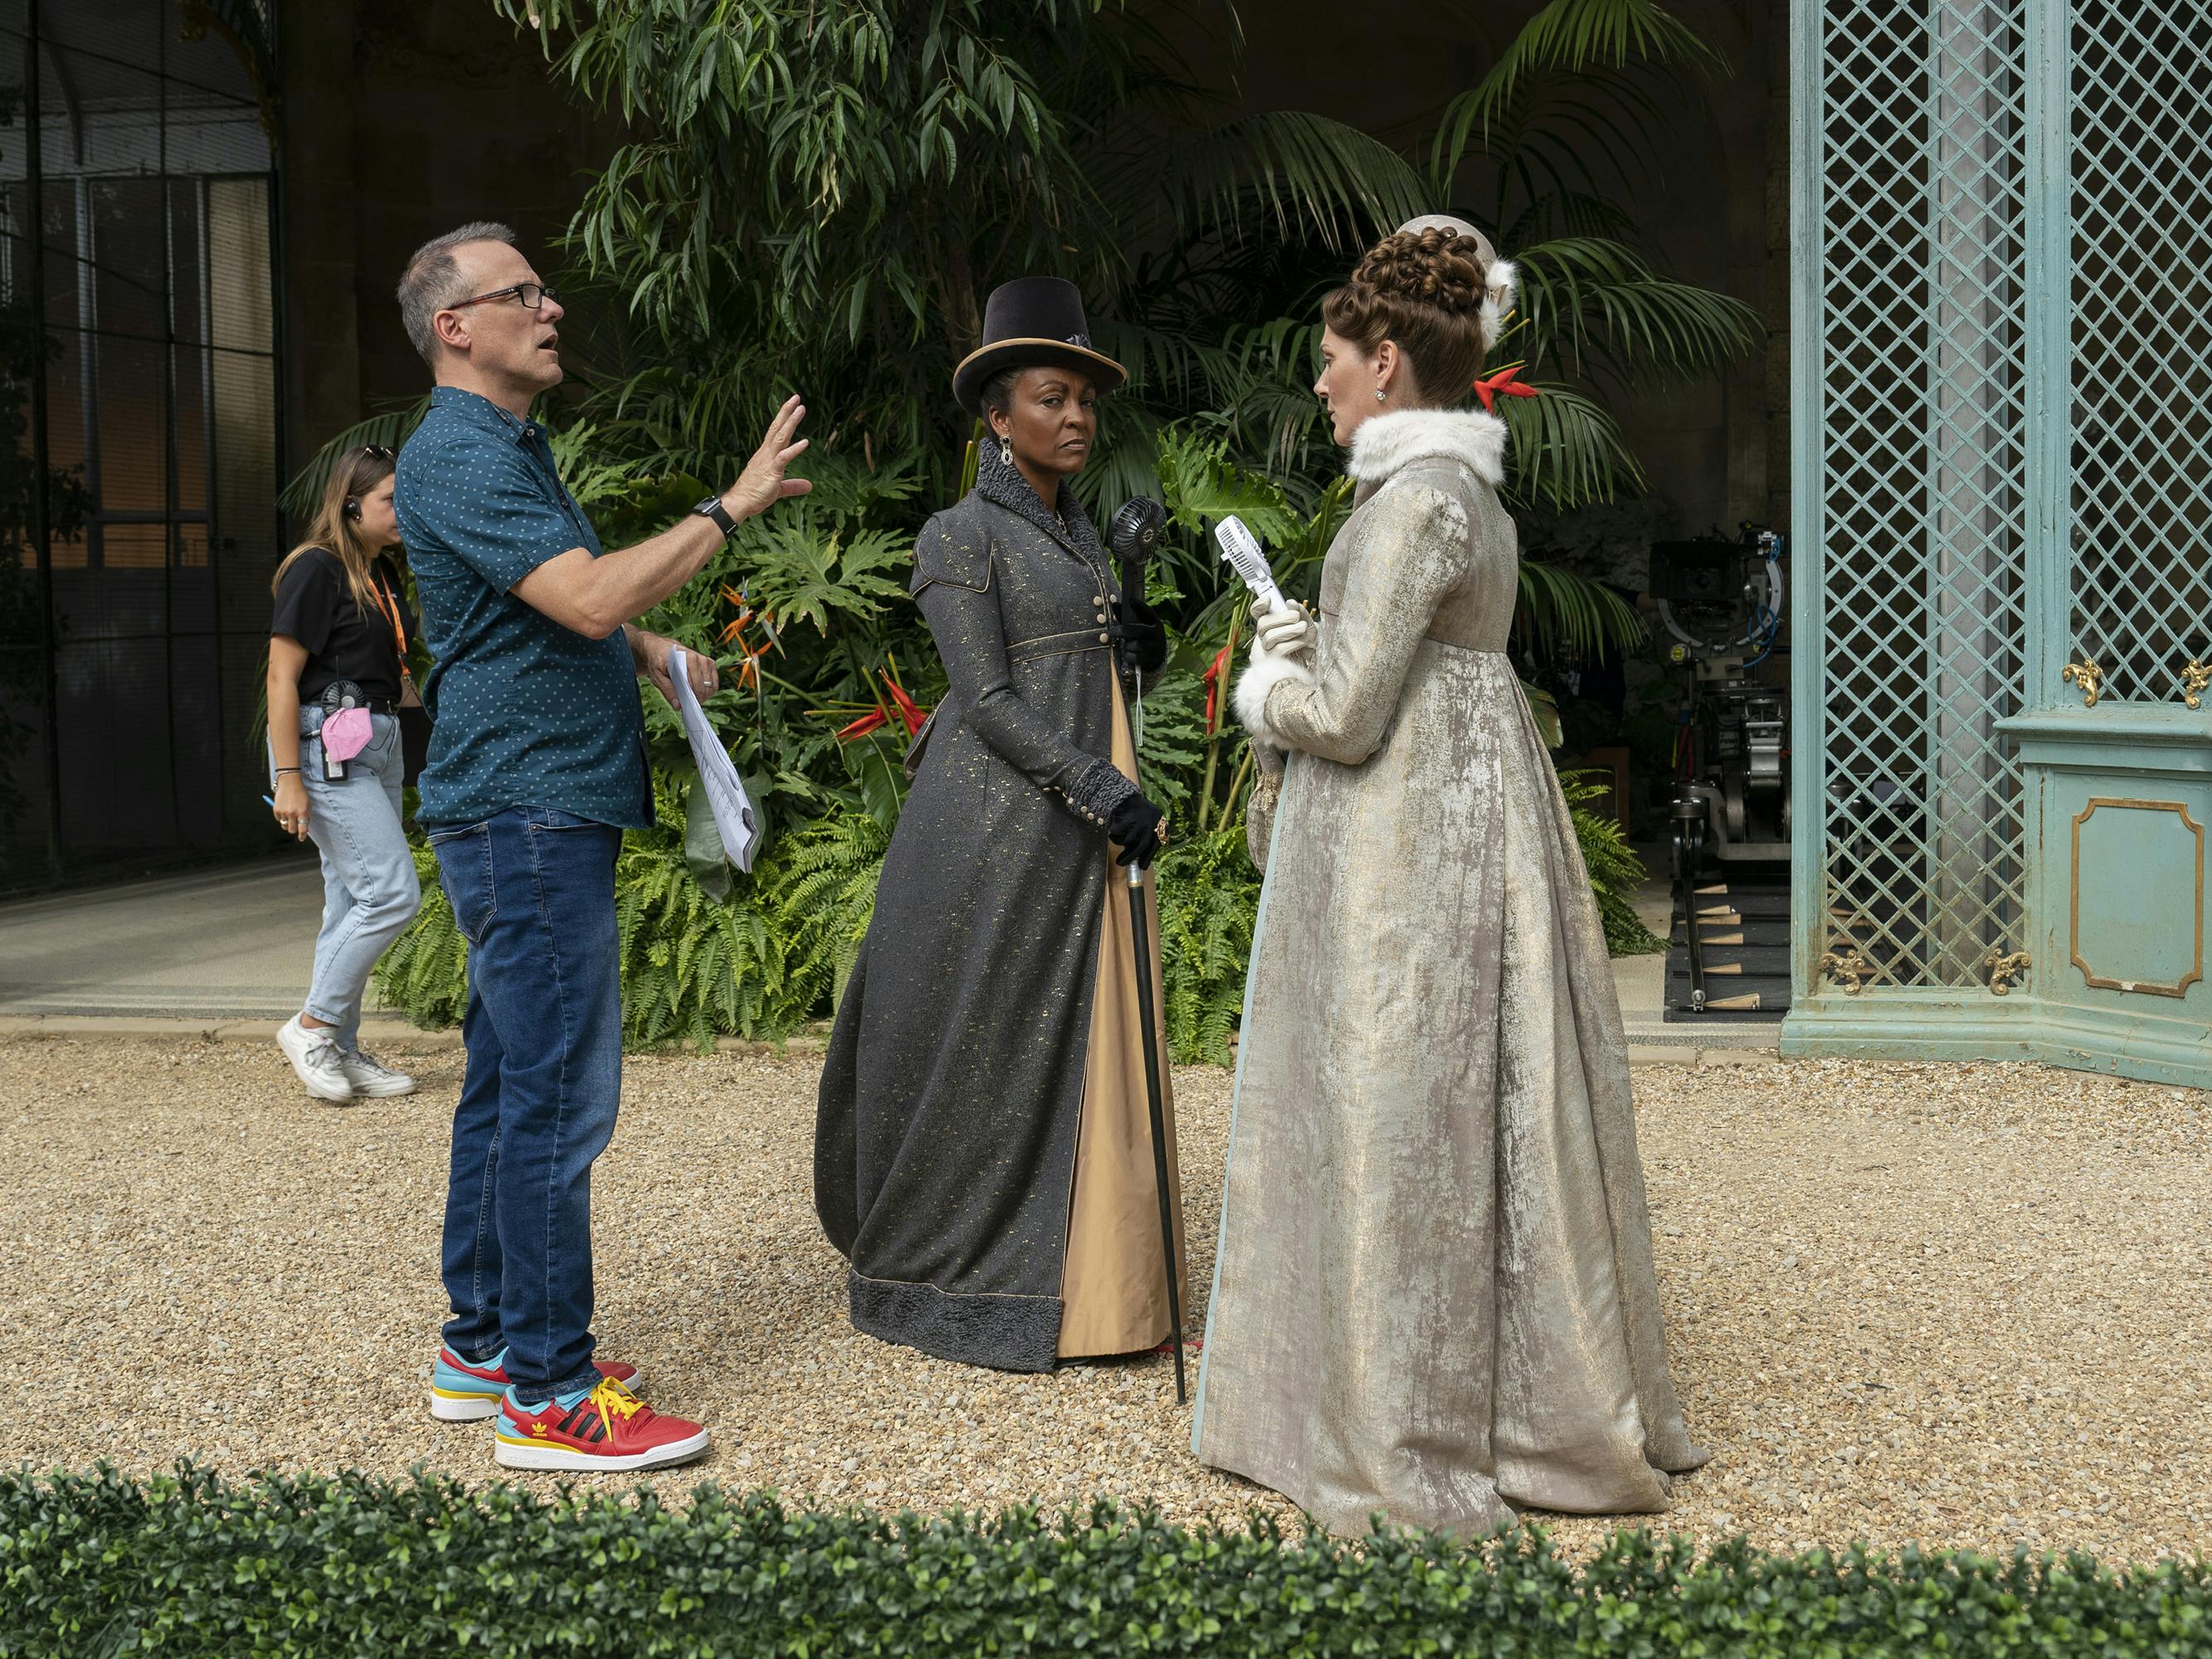 Tom Verica, Adjoa Andoh, and Ruth Gemmell behind the scenes. Verica wears jeans and brightly colored sneakers, Andoh wears a grey dress, and Gemmell wears a silver dress with her back to the camera.